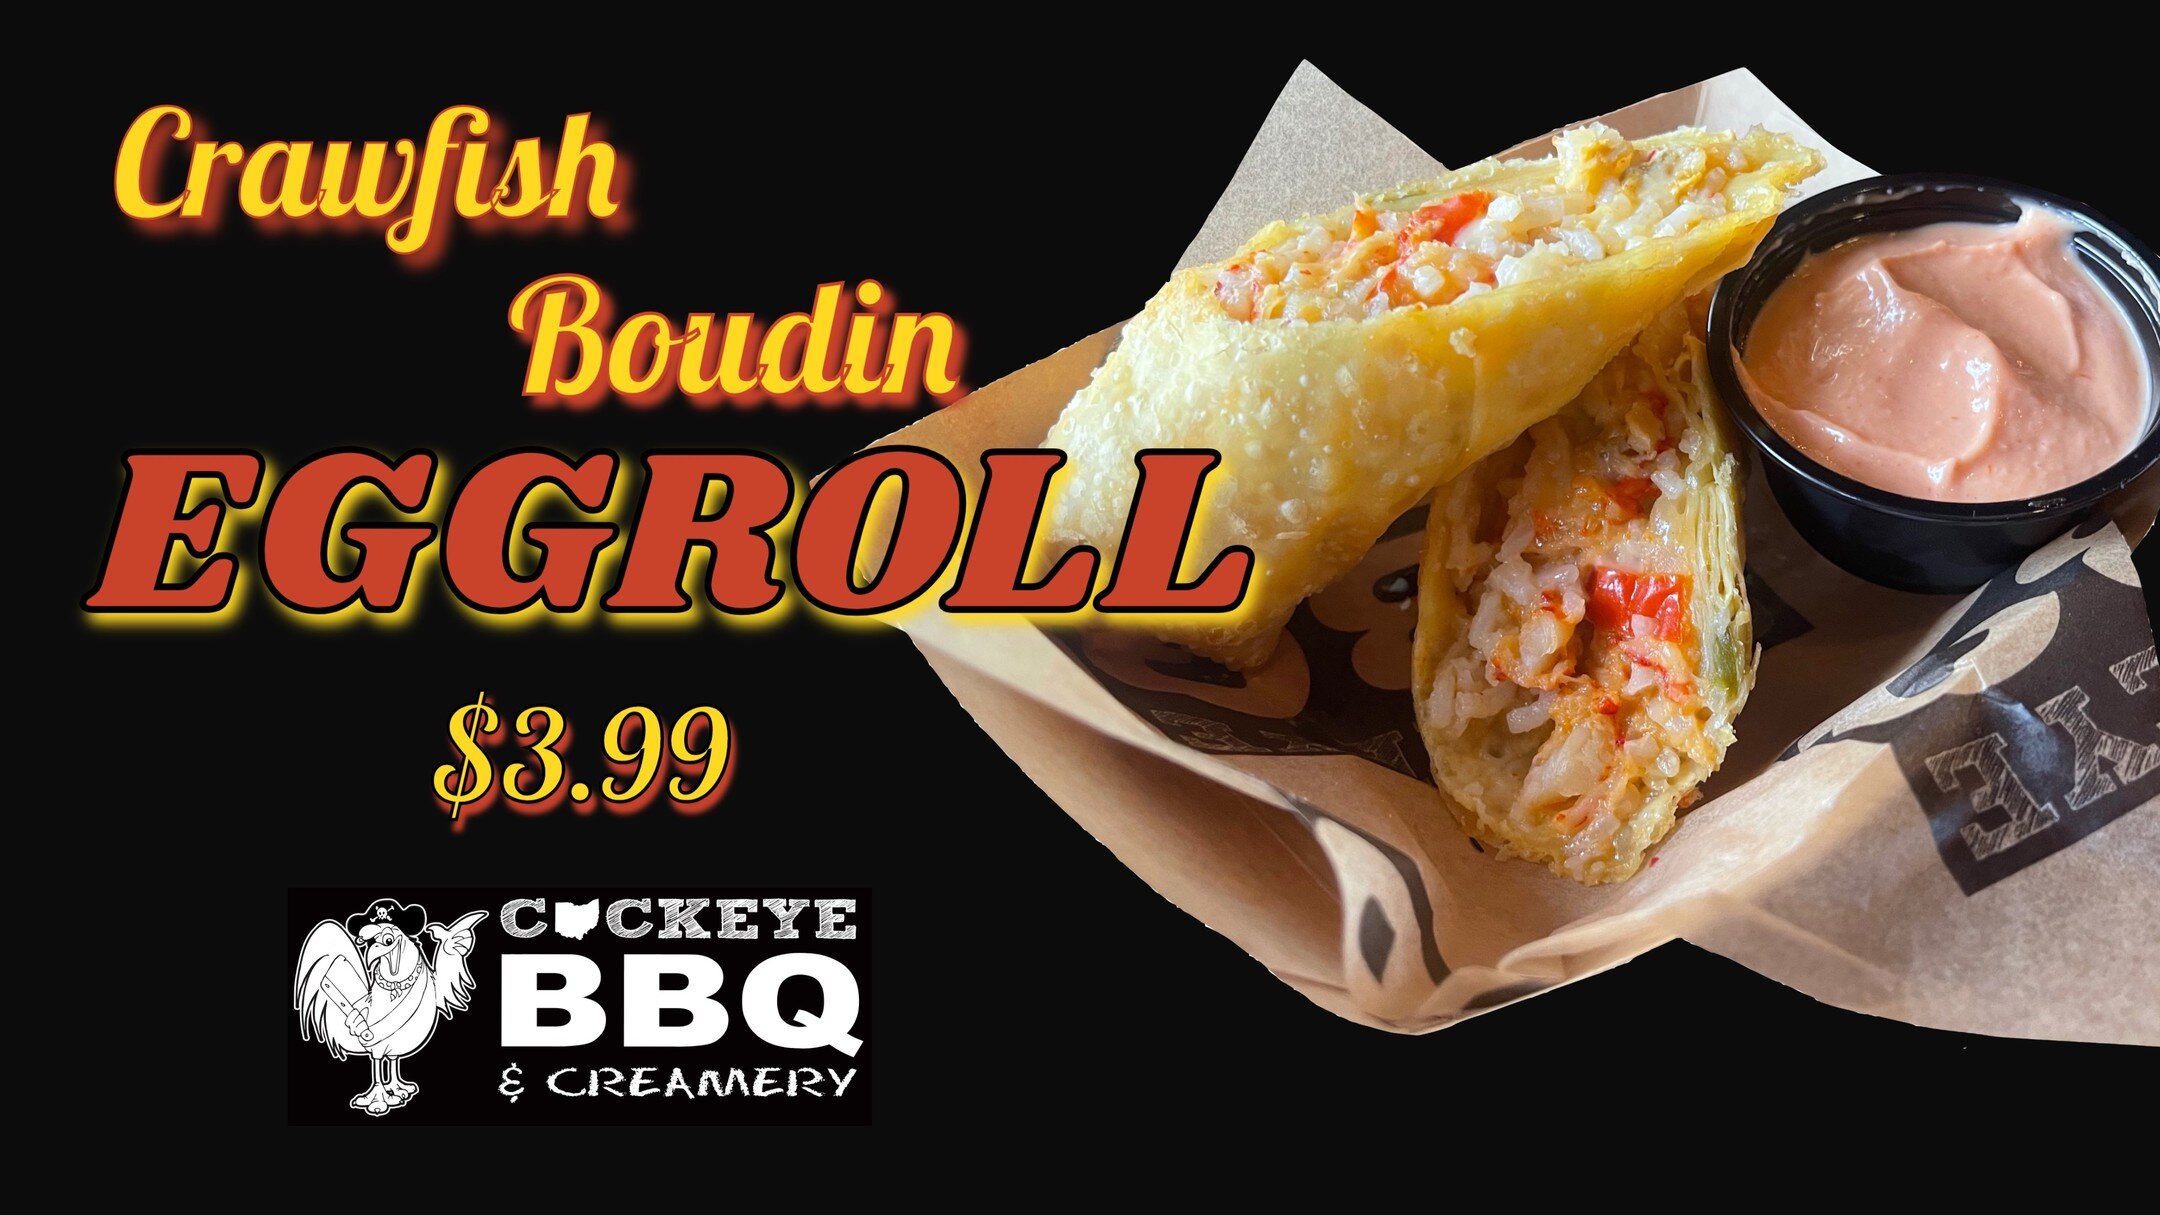 CRAWFISH BOUDIN EGGROLL!
Louisiana Crawfish Boudin (Crawfish Tail Meat, Peppers, Onions, Celery, White Rice, House-Made Cajun Seasoning) and Pepper Jack Cheese. Hand Rolled into an Eggroll Wrapper and Deep Fried. Served with a Choice of Tangy Creole 